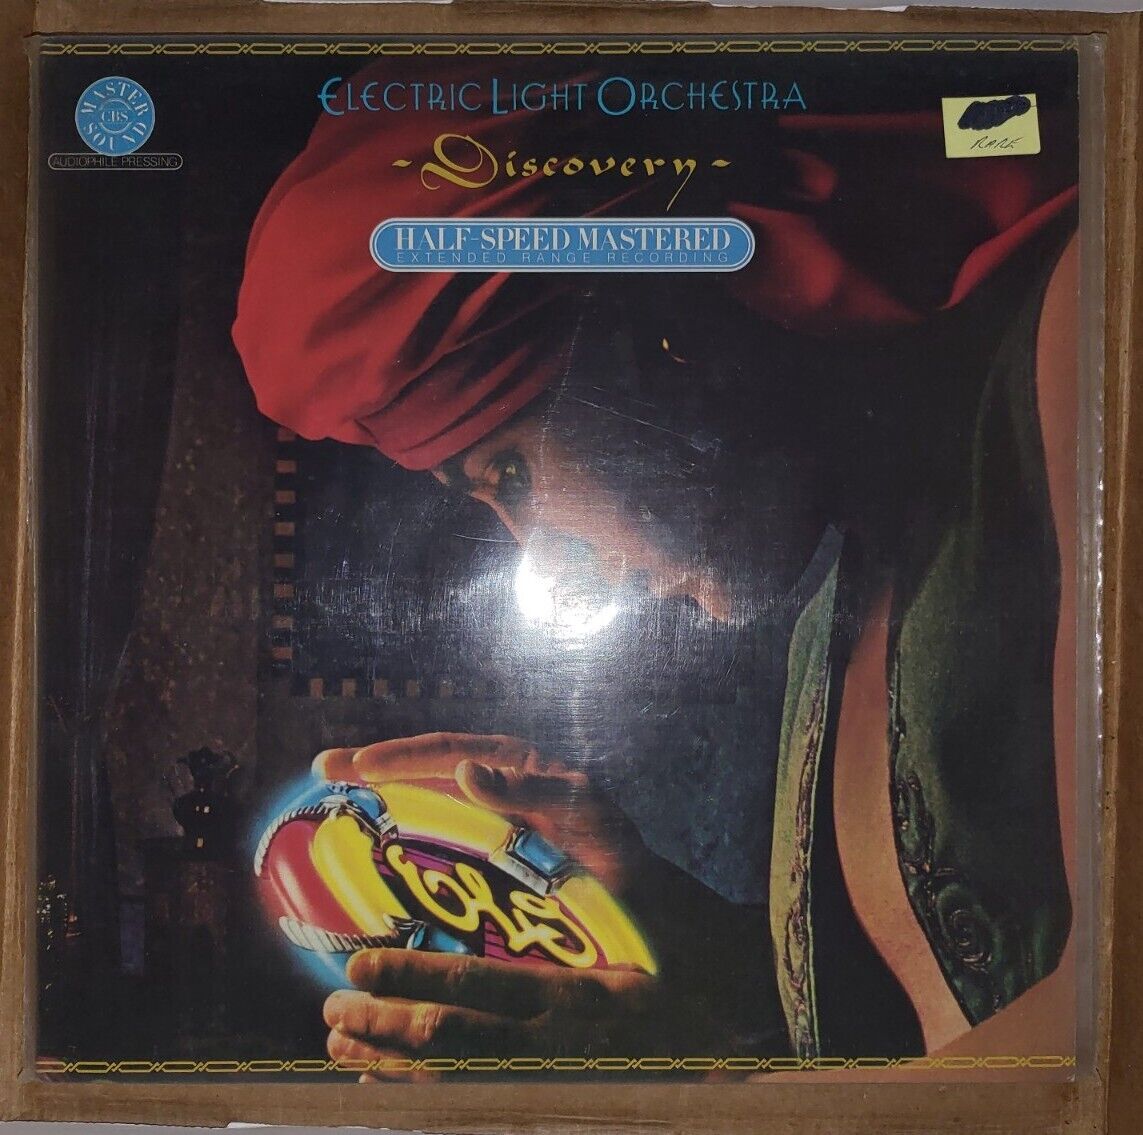 Electric Light Orchestra - Discovery 🇺🇸 SEALED 1/2 Speed Mastered 